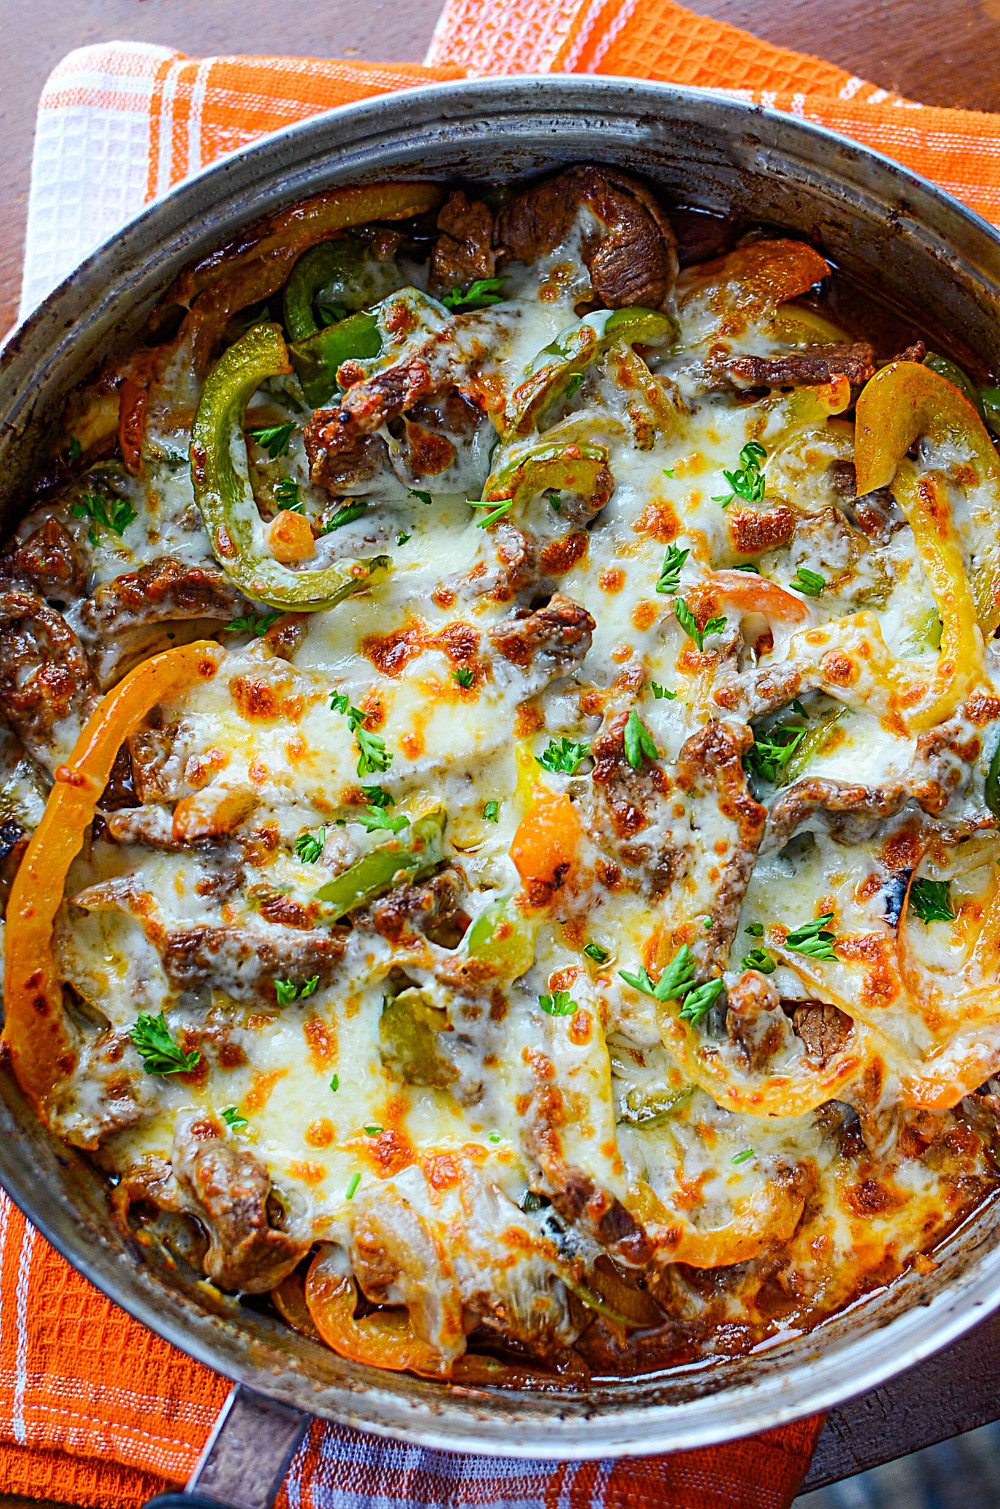 Low Carb Keto Cheesesteak Skillet
 Low Carb Philly Cheesesteak Skillet Recipe